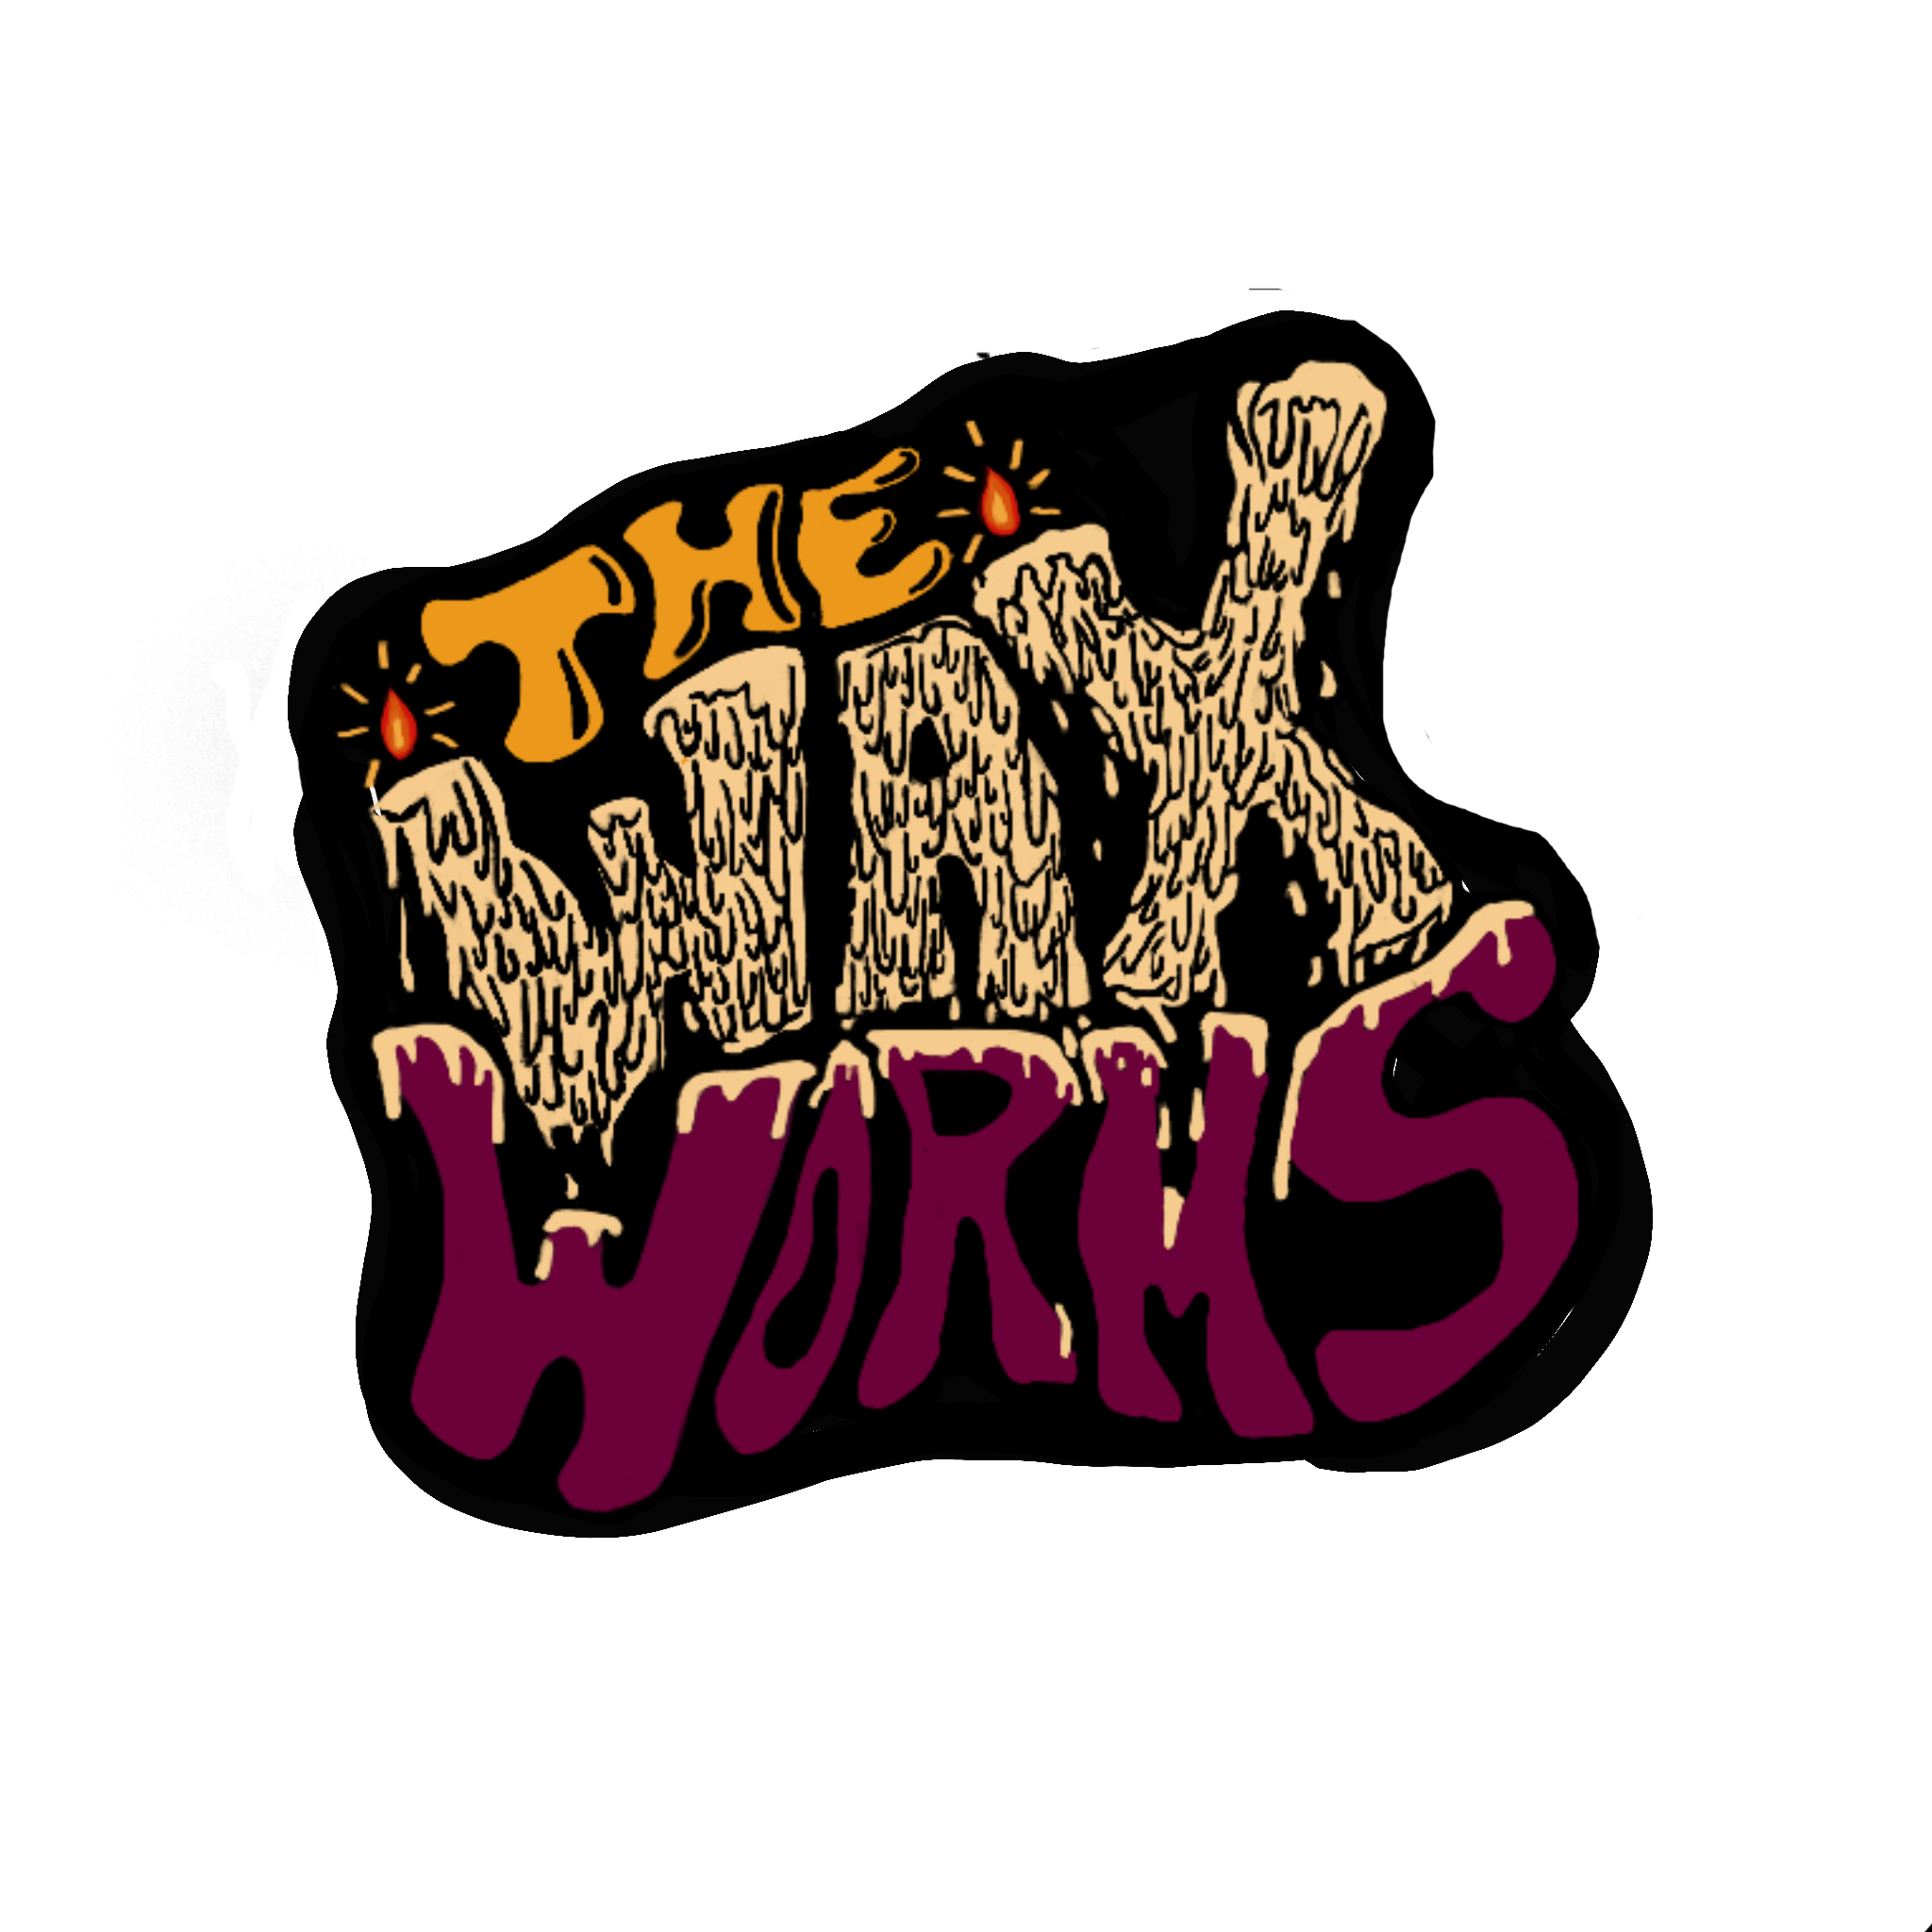 The Wax Worms